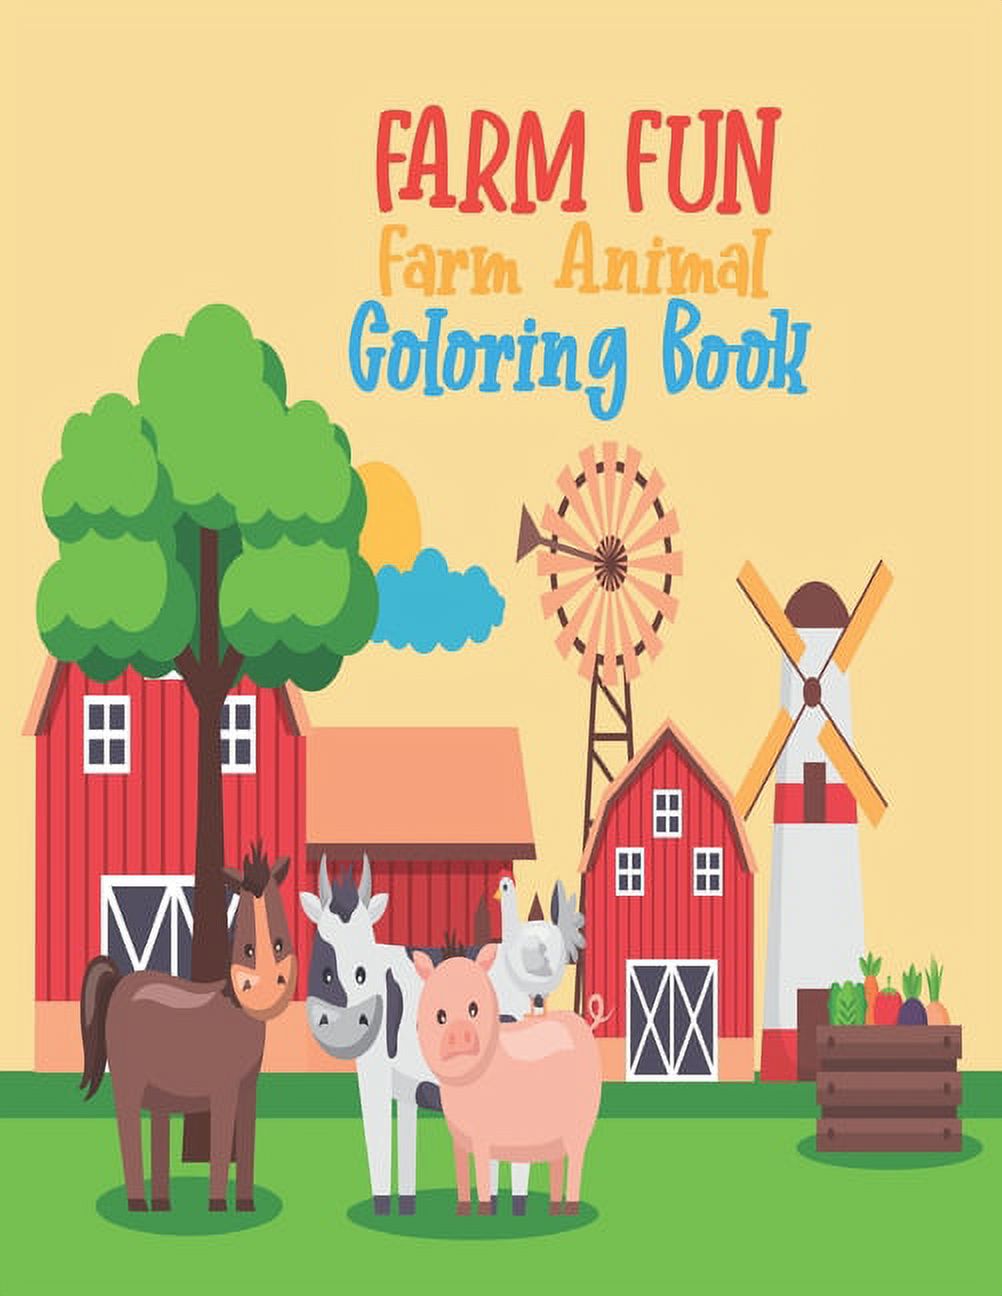 Farm Fun! Farm animal coloring book : The Big, Simple and Fun Designs! Cows, Chickens, Horses, Ducks and more! Farm Animals Coloring Book For Toddlers & Kids! Relax & Find Your True Colors (Paperback) - image 1 of 1